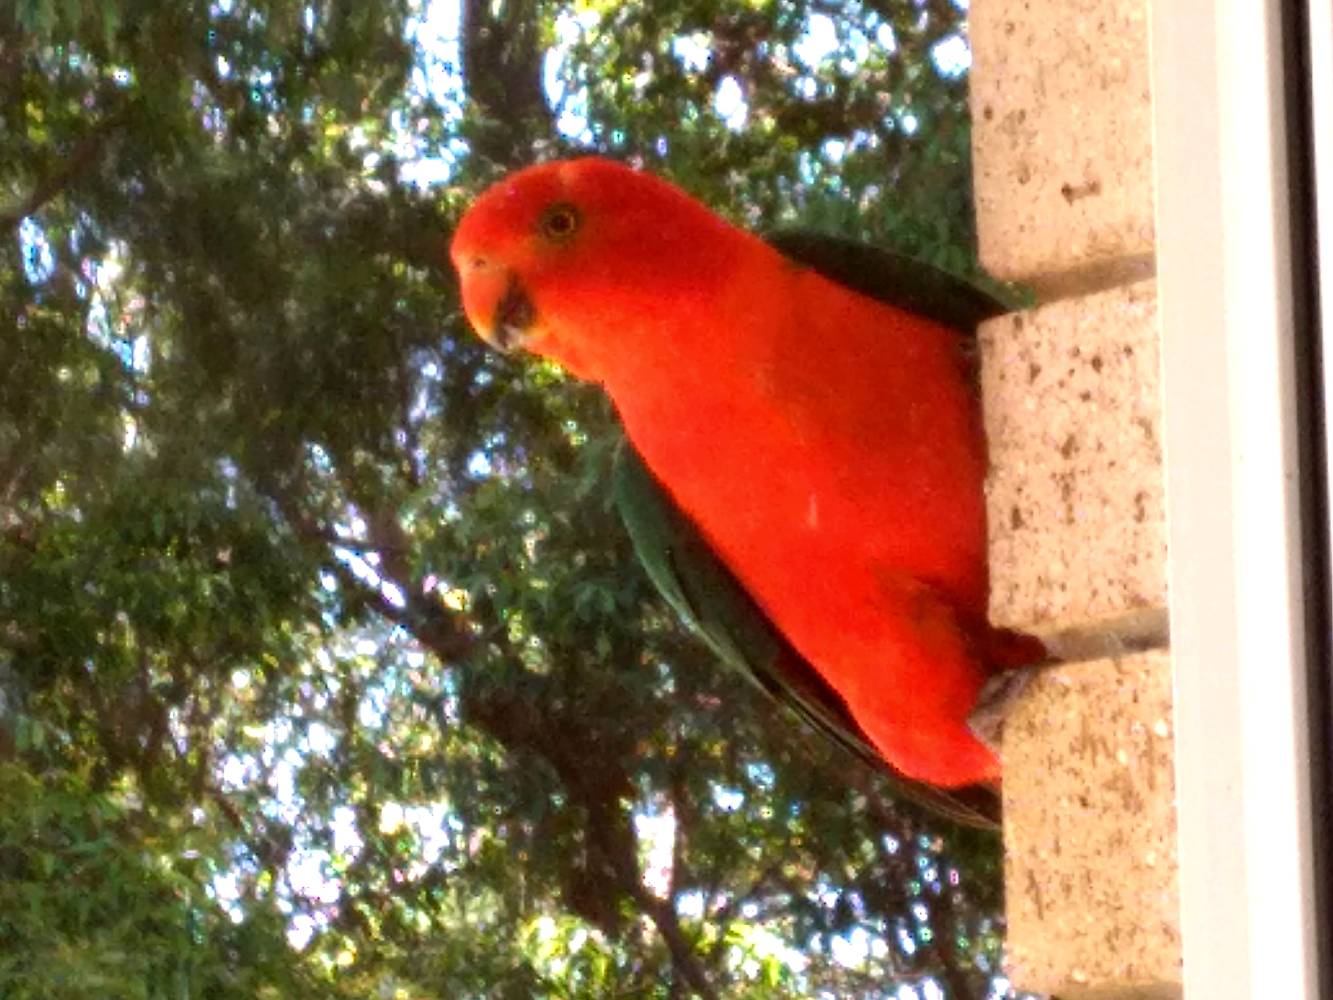 Friendly Local King Parrot.